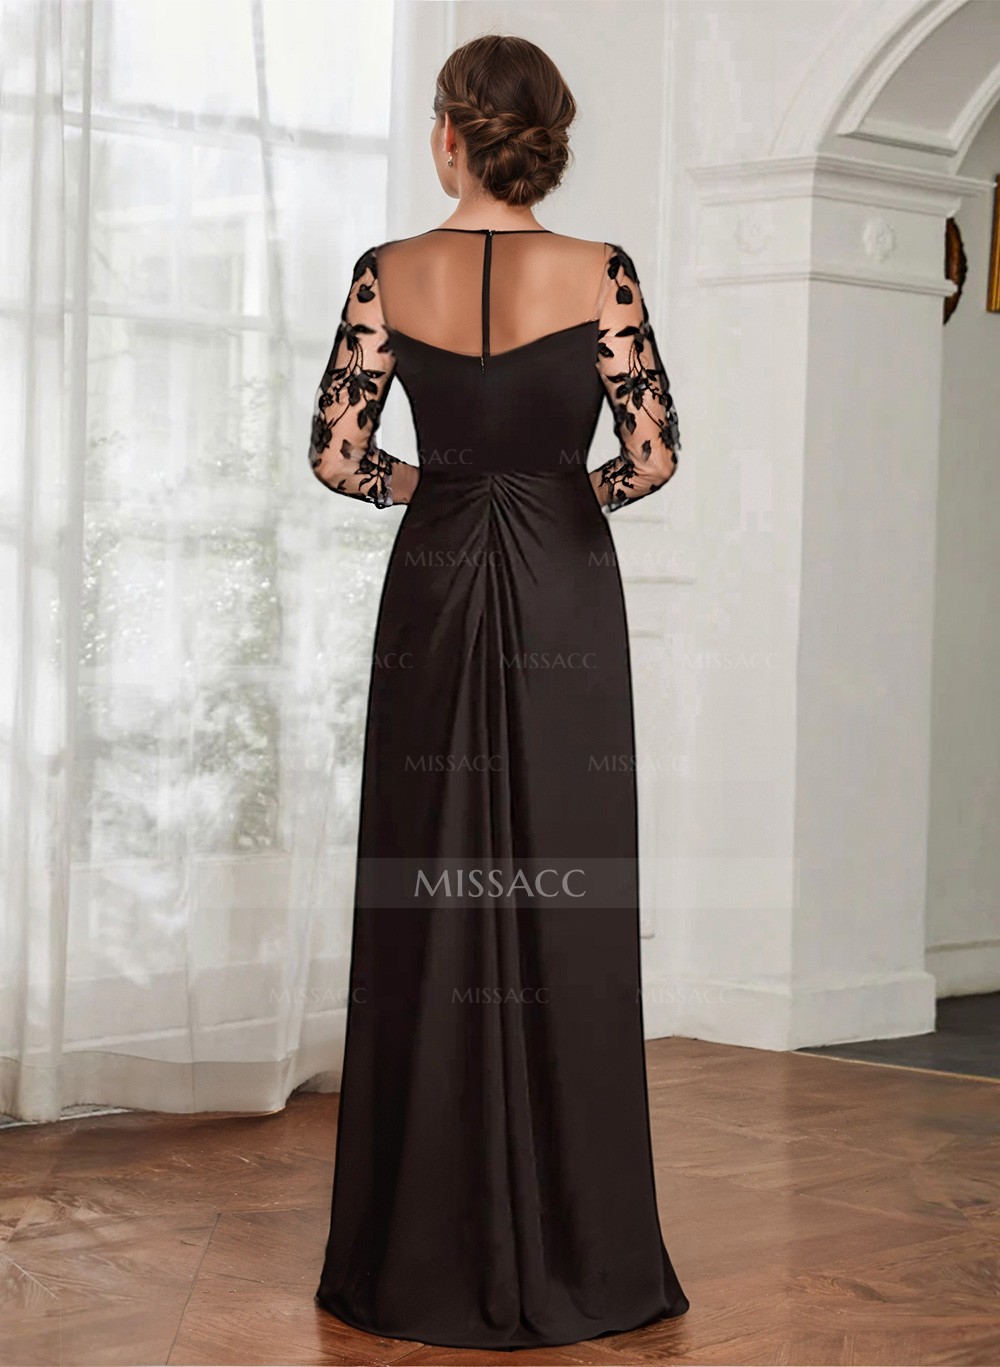 Sheath/Column Illusion Neck Chiffon Mother Of The Bride Dresses With Appliques Lace